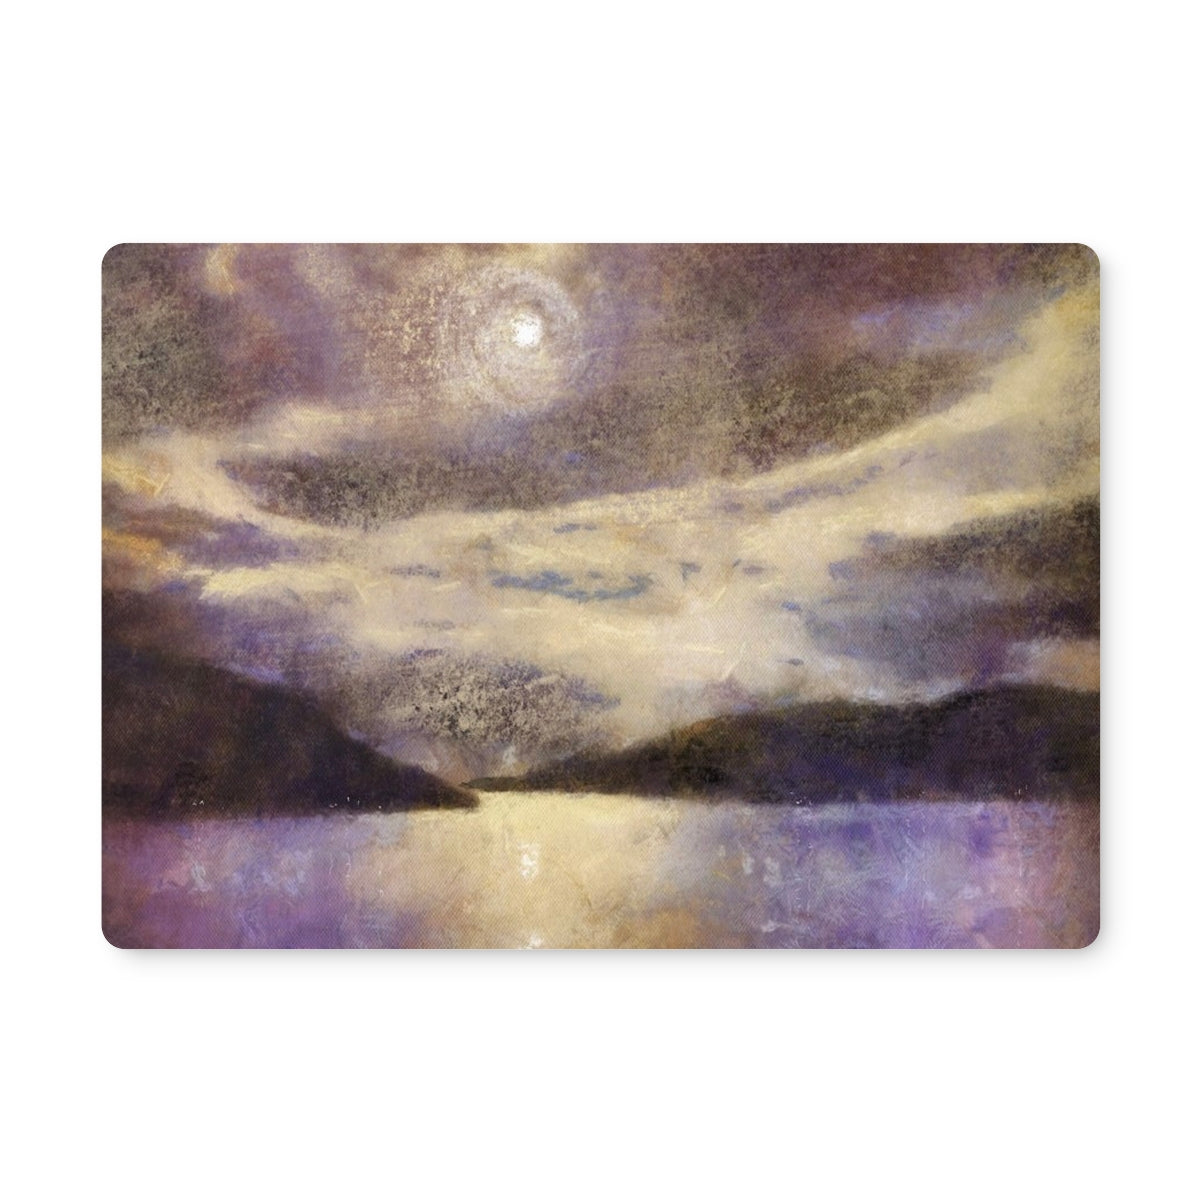 Moonlight Meets Lewis & Harris Art Gifts Placemat-Placemats-Hebridean Islands Art Gallery-4 Placemats-Paintings, Prints, Homeware, Art Gifts From Scotland By Scottish Artist Kevin Hunter